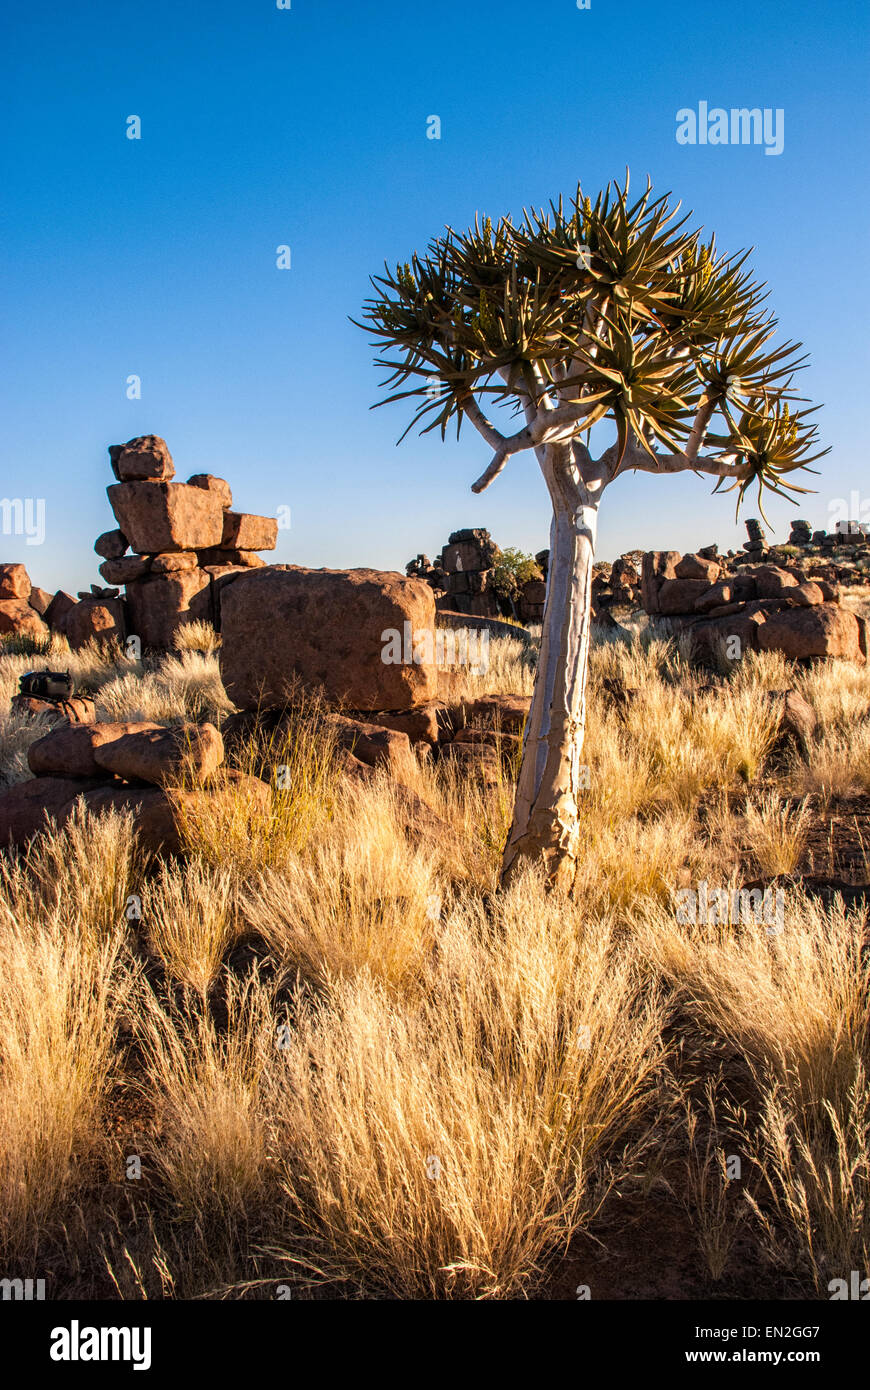 Giant's Playground, showing dolerite boulders and a Quiver Tree, Aloe dichotoma, Keetmannshoop, Namibia, Southern West Africa Stock Photo